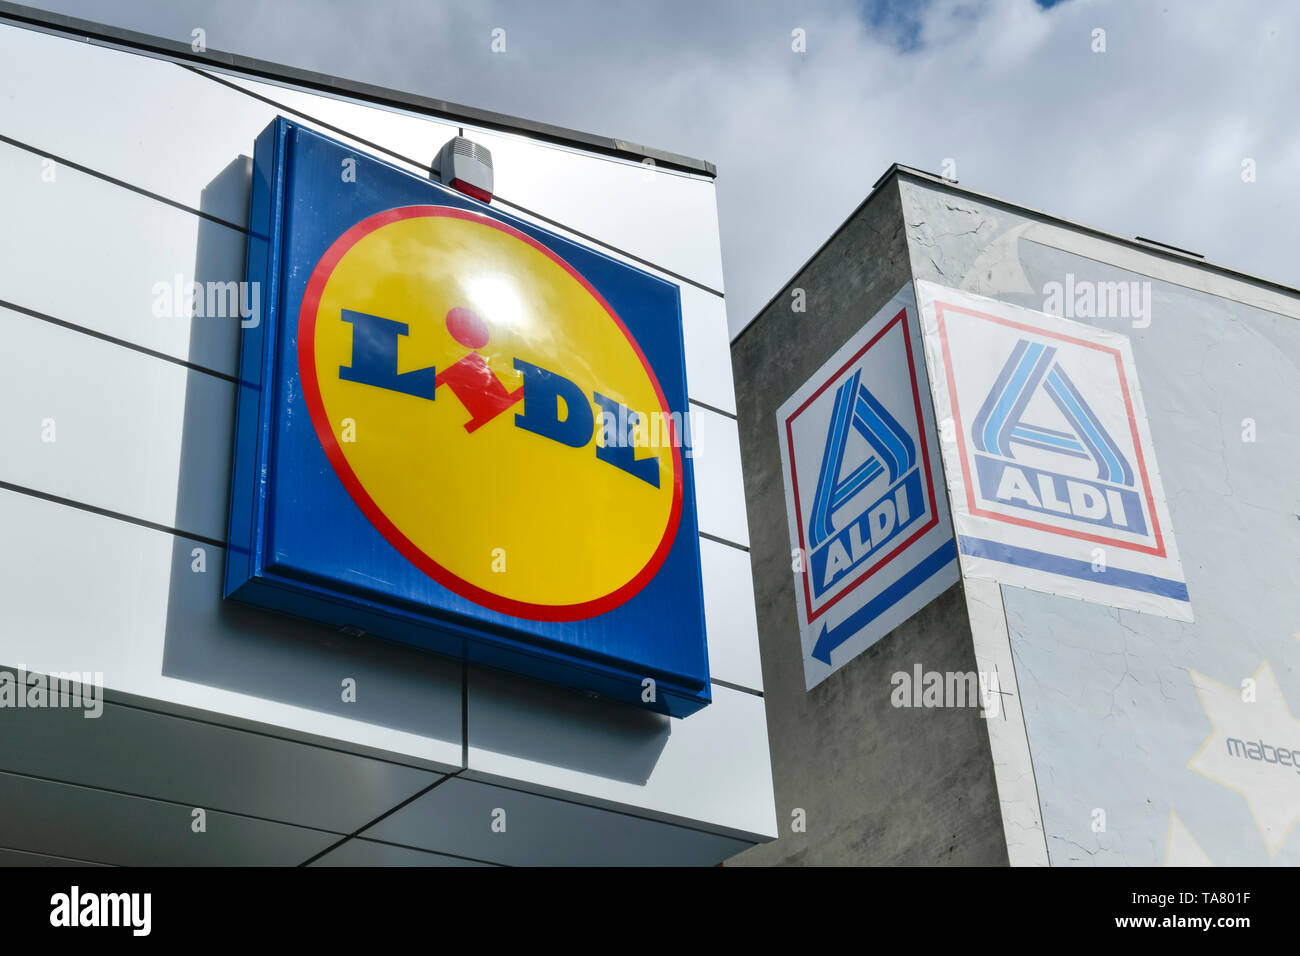 Outside View Of Lidl High Resolution Stock Photography and Images - Alamy